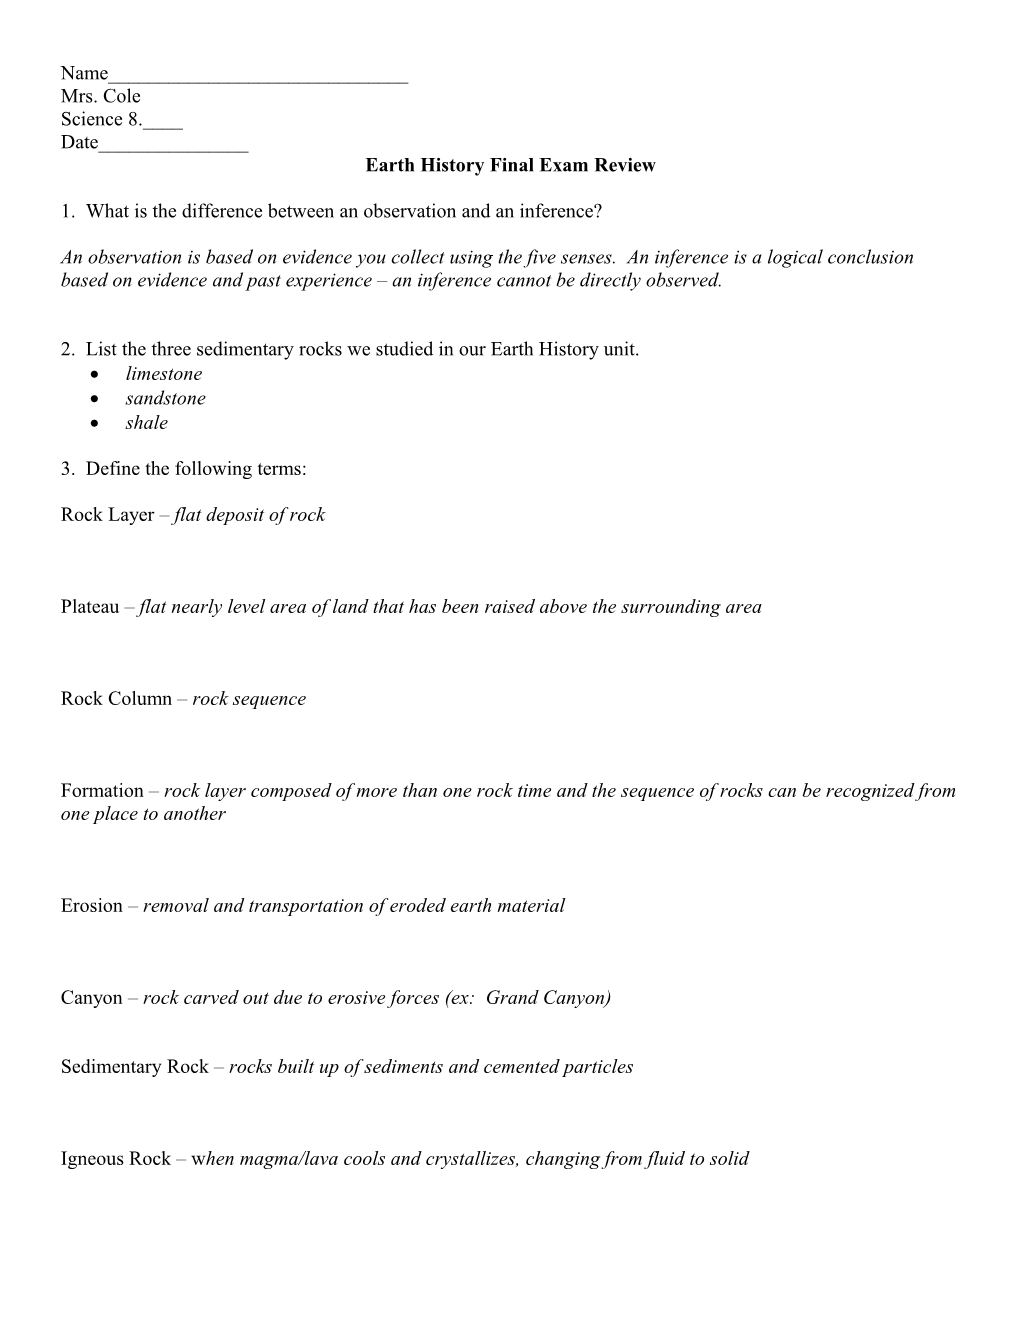 Earth History Final Exam Review